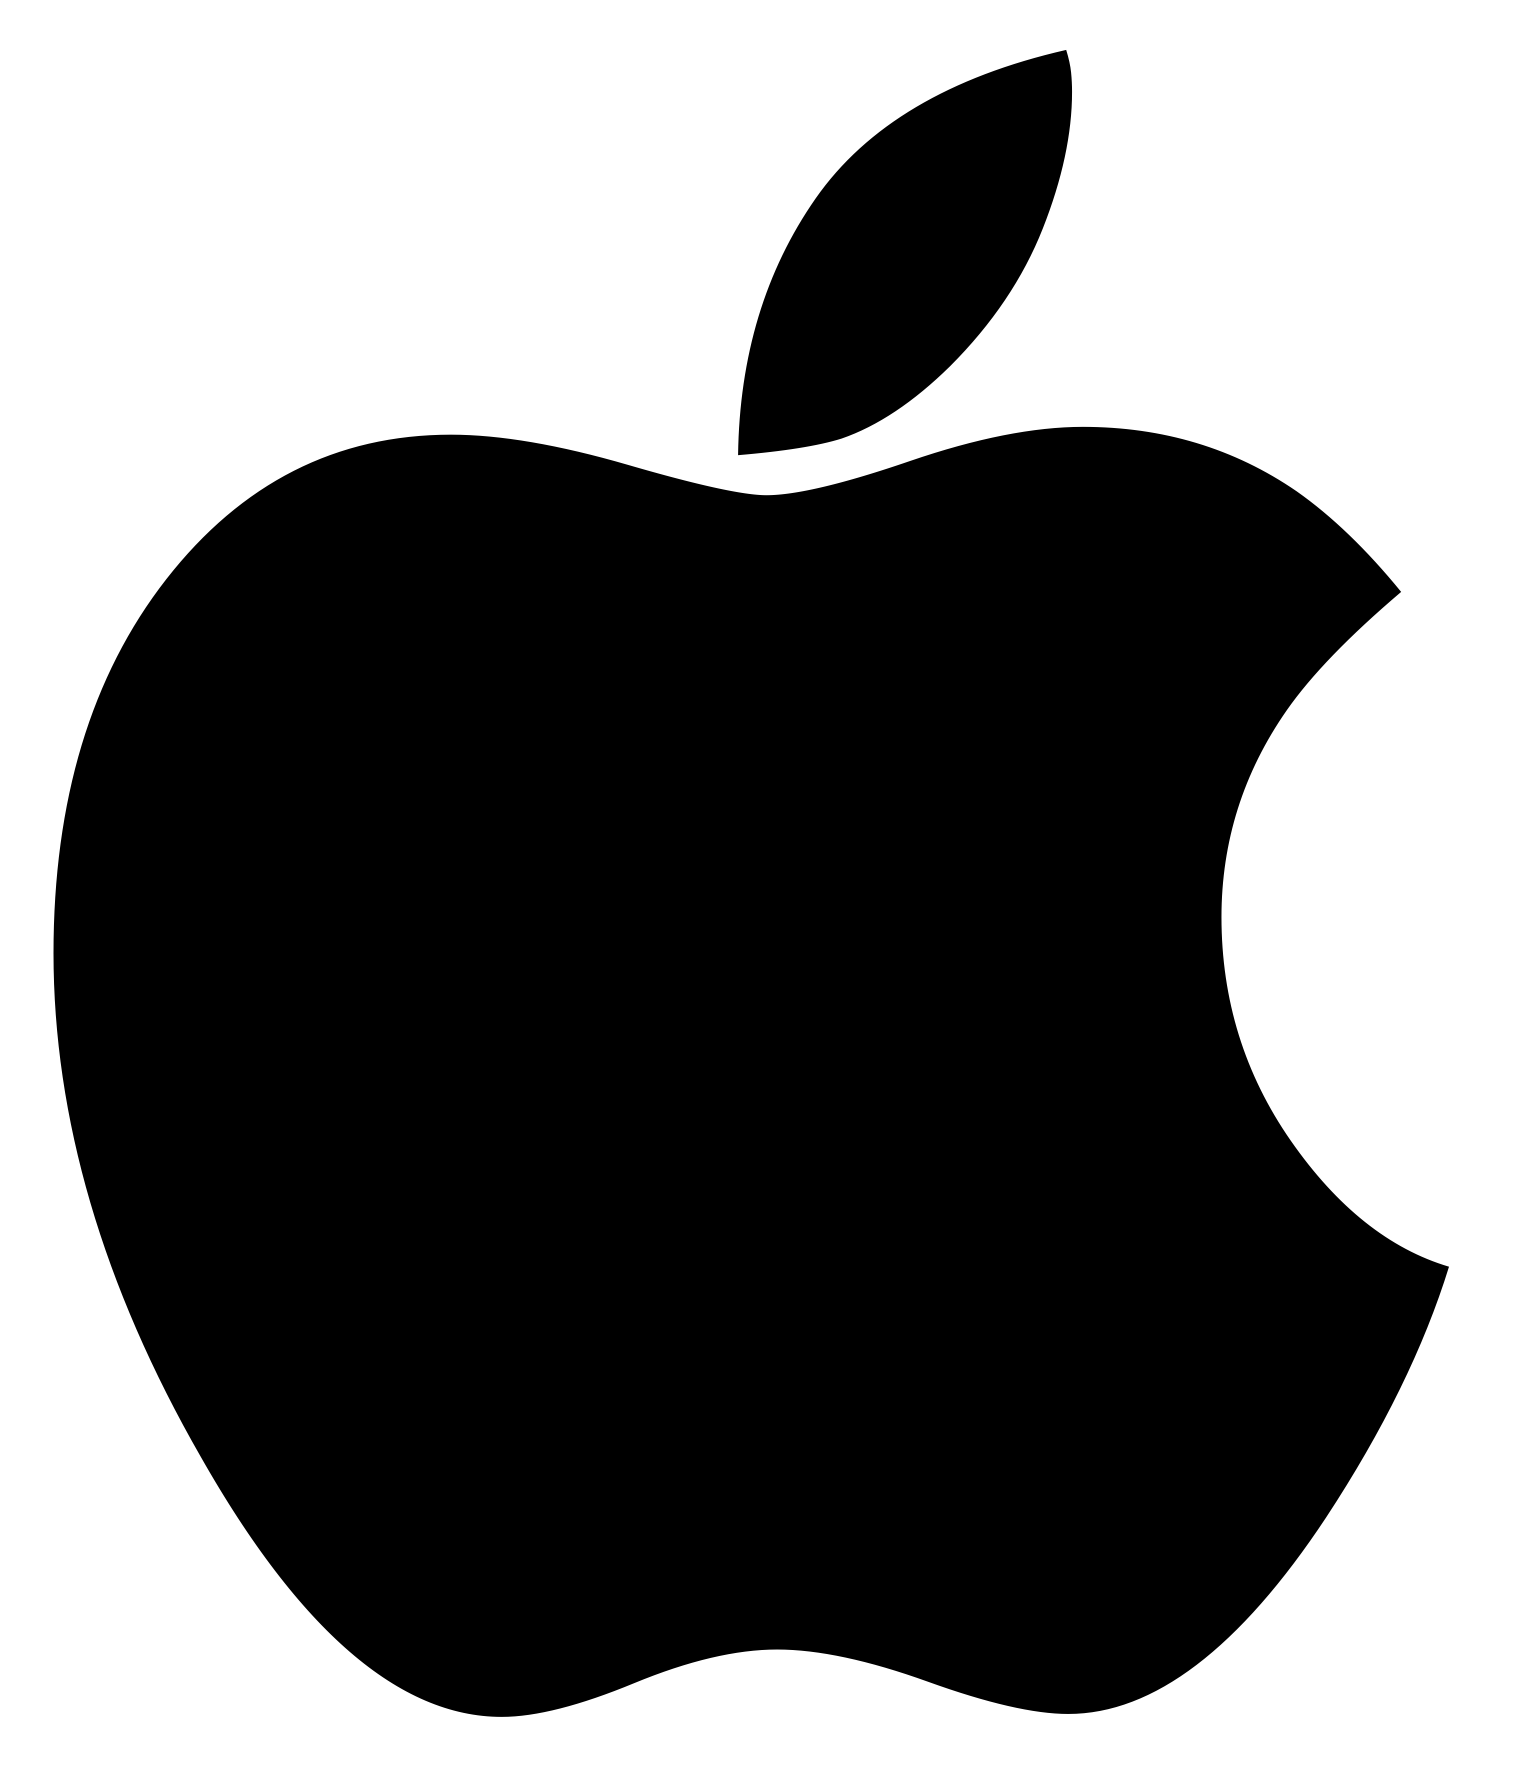 Image of the Apple Logo